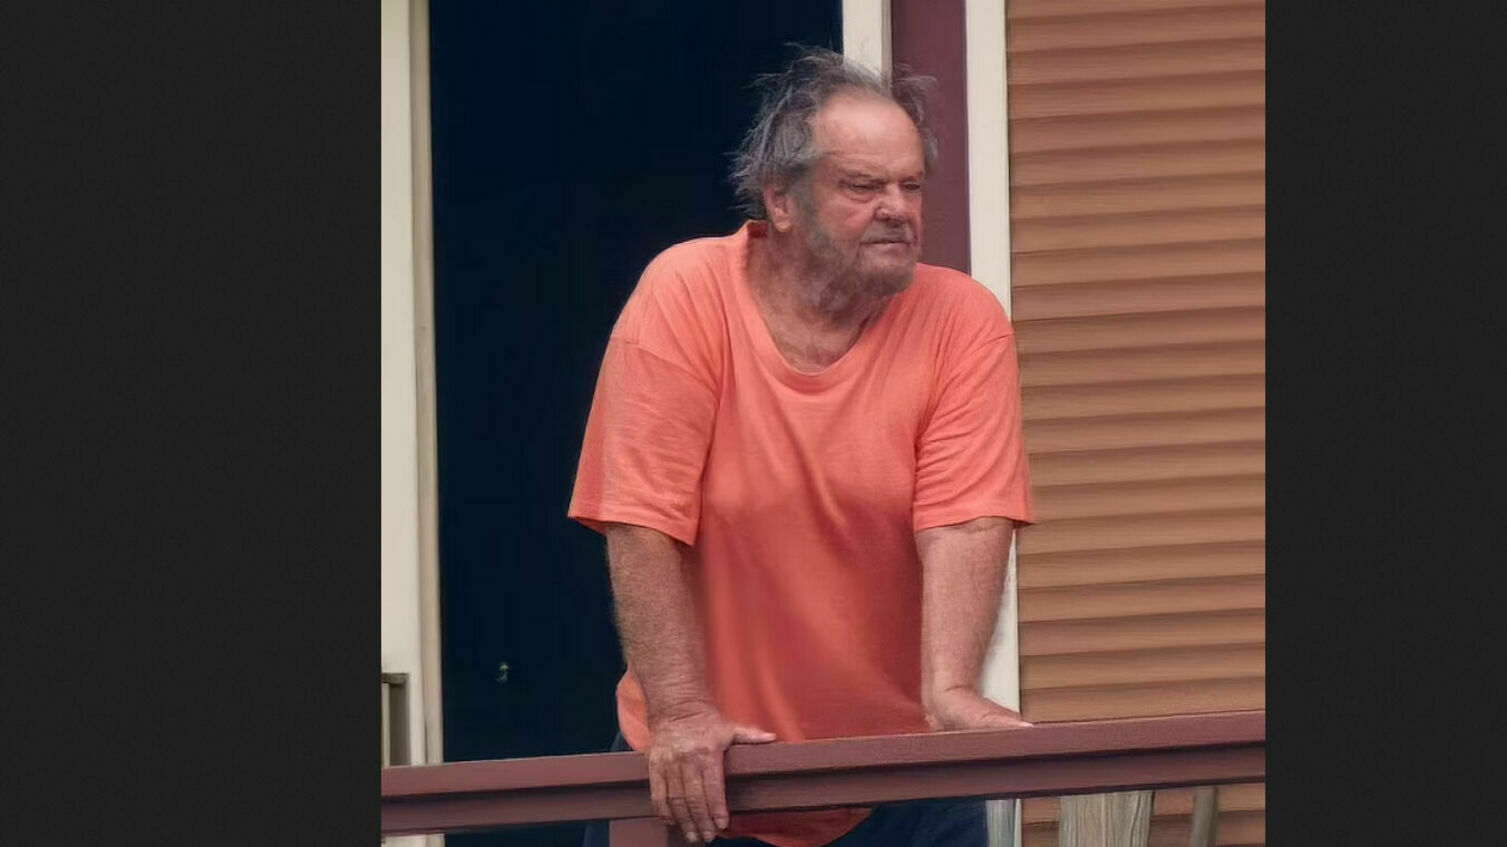 After a long break, a video with Jack Nicholson appeared. His appearance is alarming